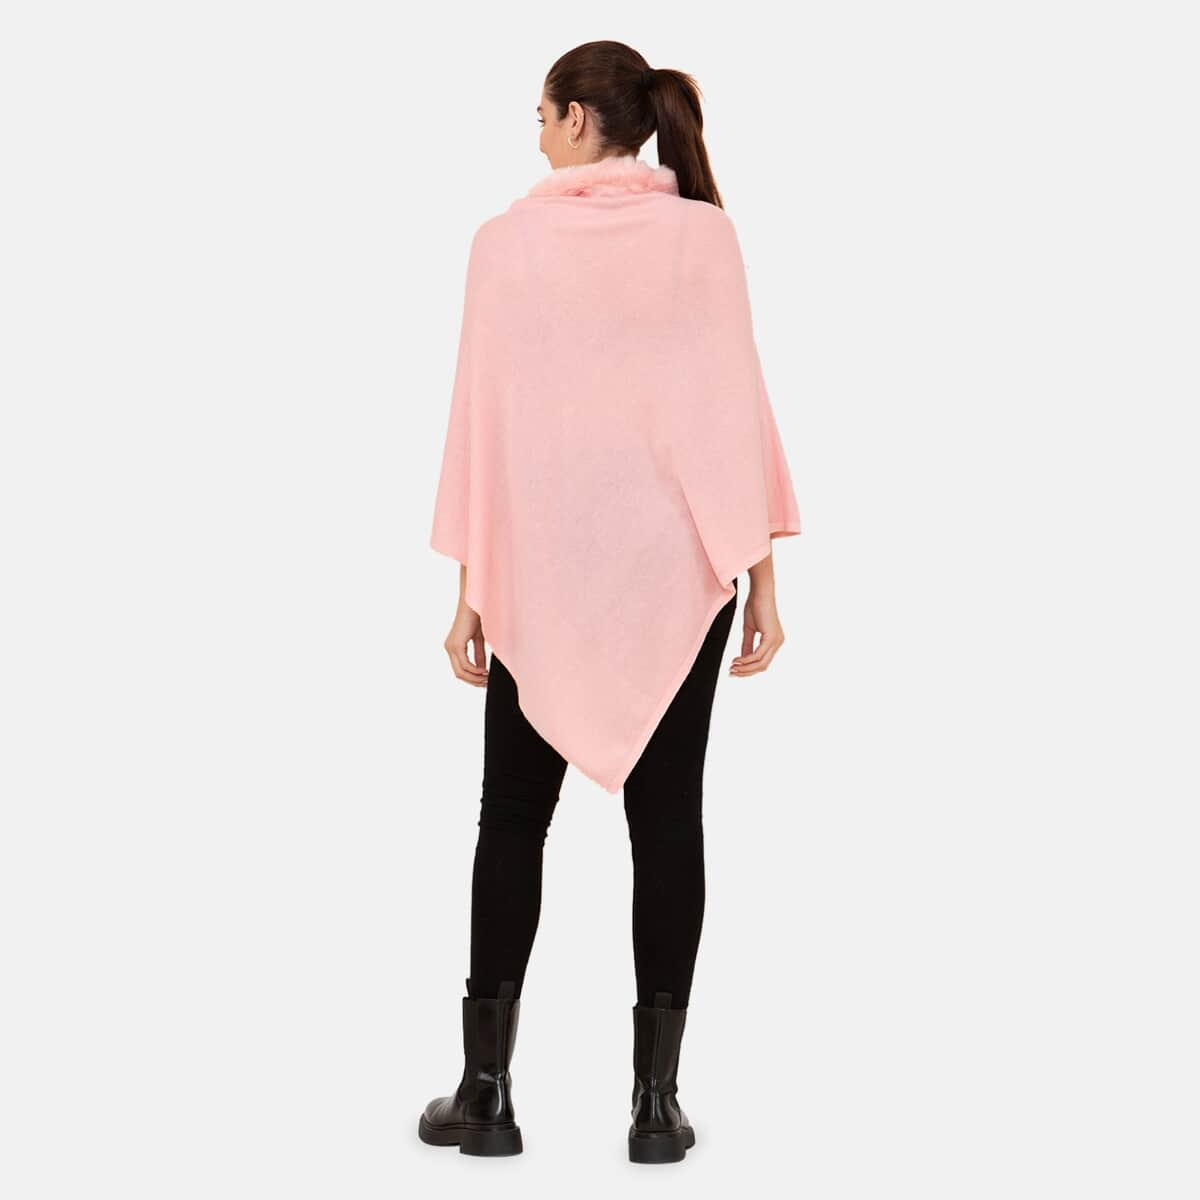 LA MAREY 100% Pashmina Cashmere Dusty Rose Designer Poncho for Women with Faux Fur Trim - One Size Fits Most , Cashmere Poncho , Women Capes , Poncho Scarf image number 1